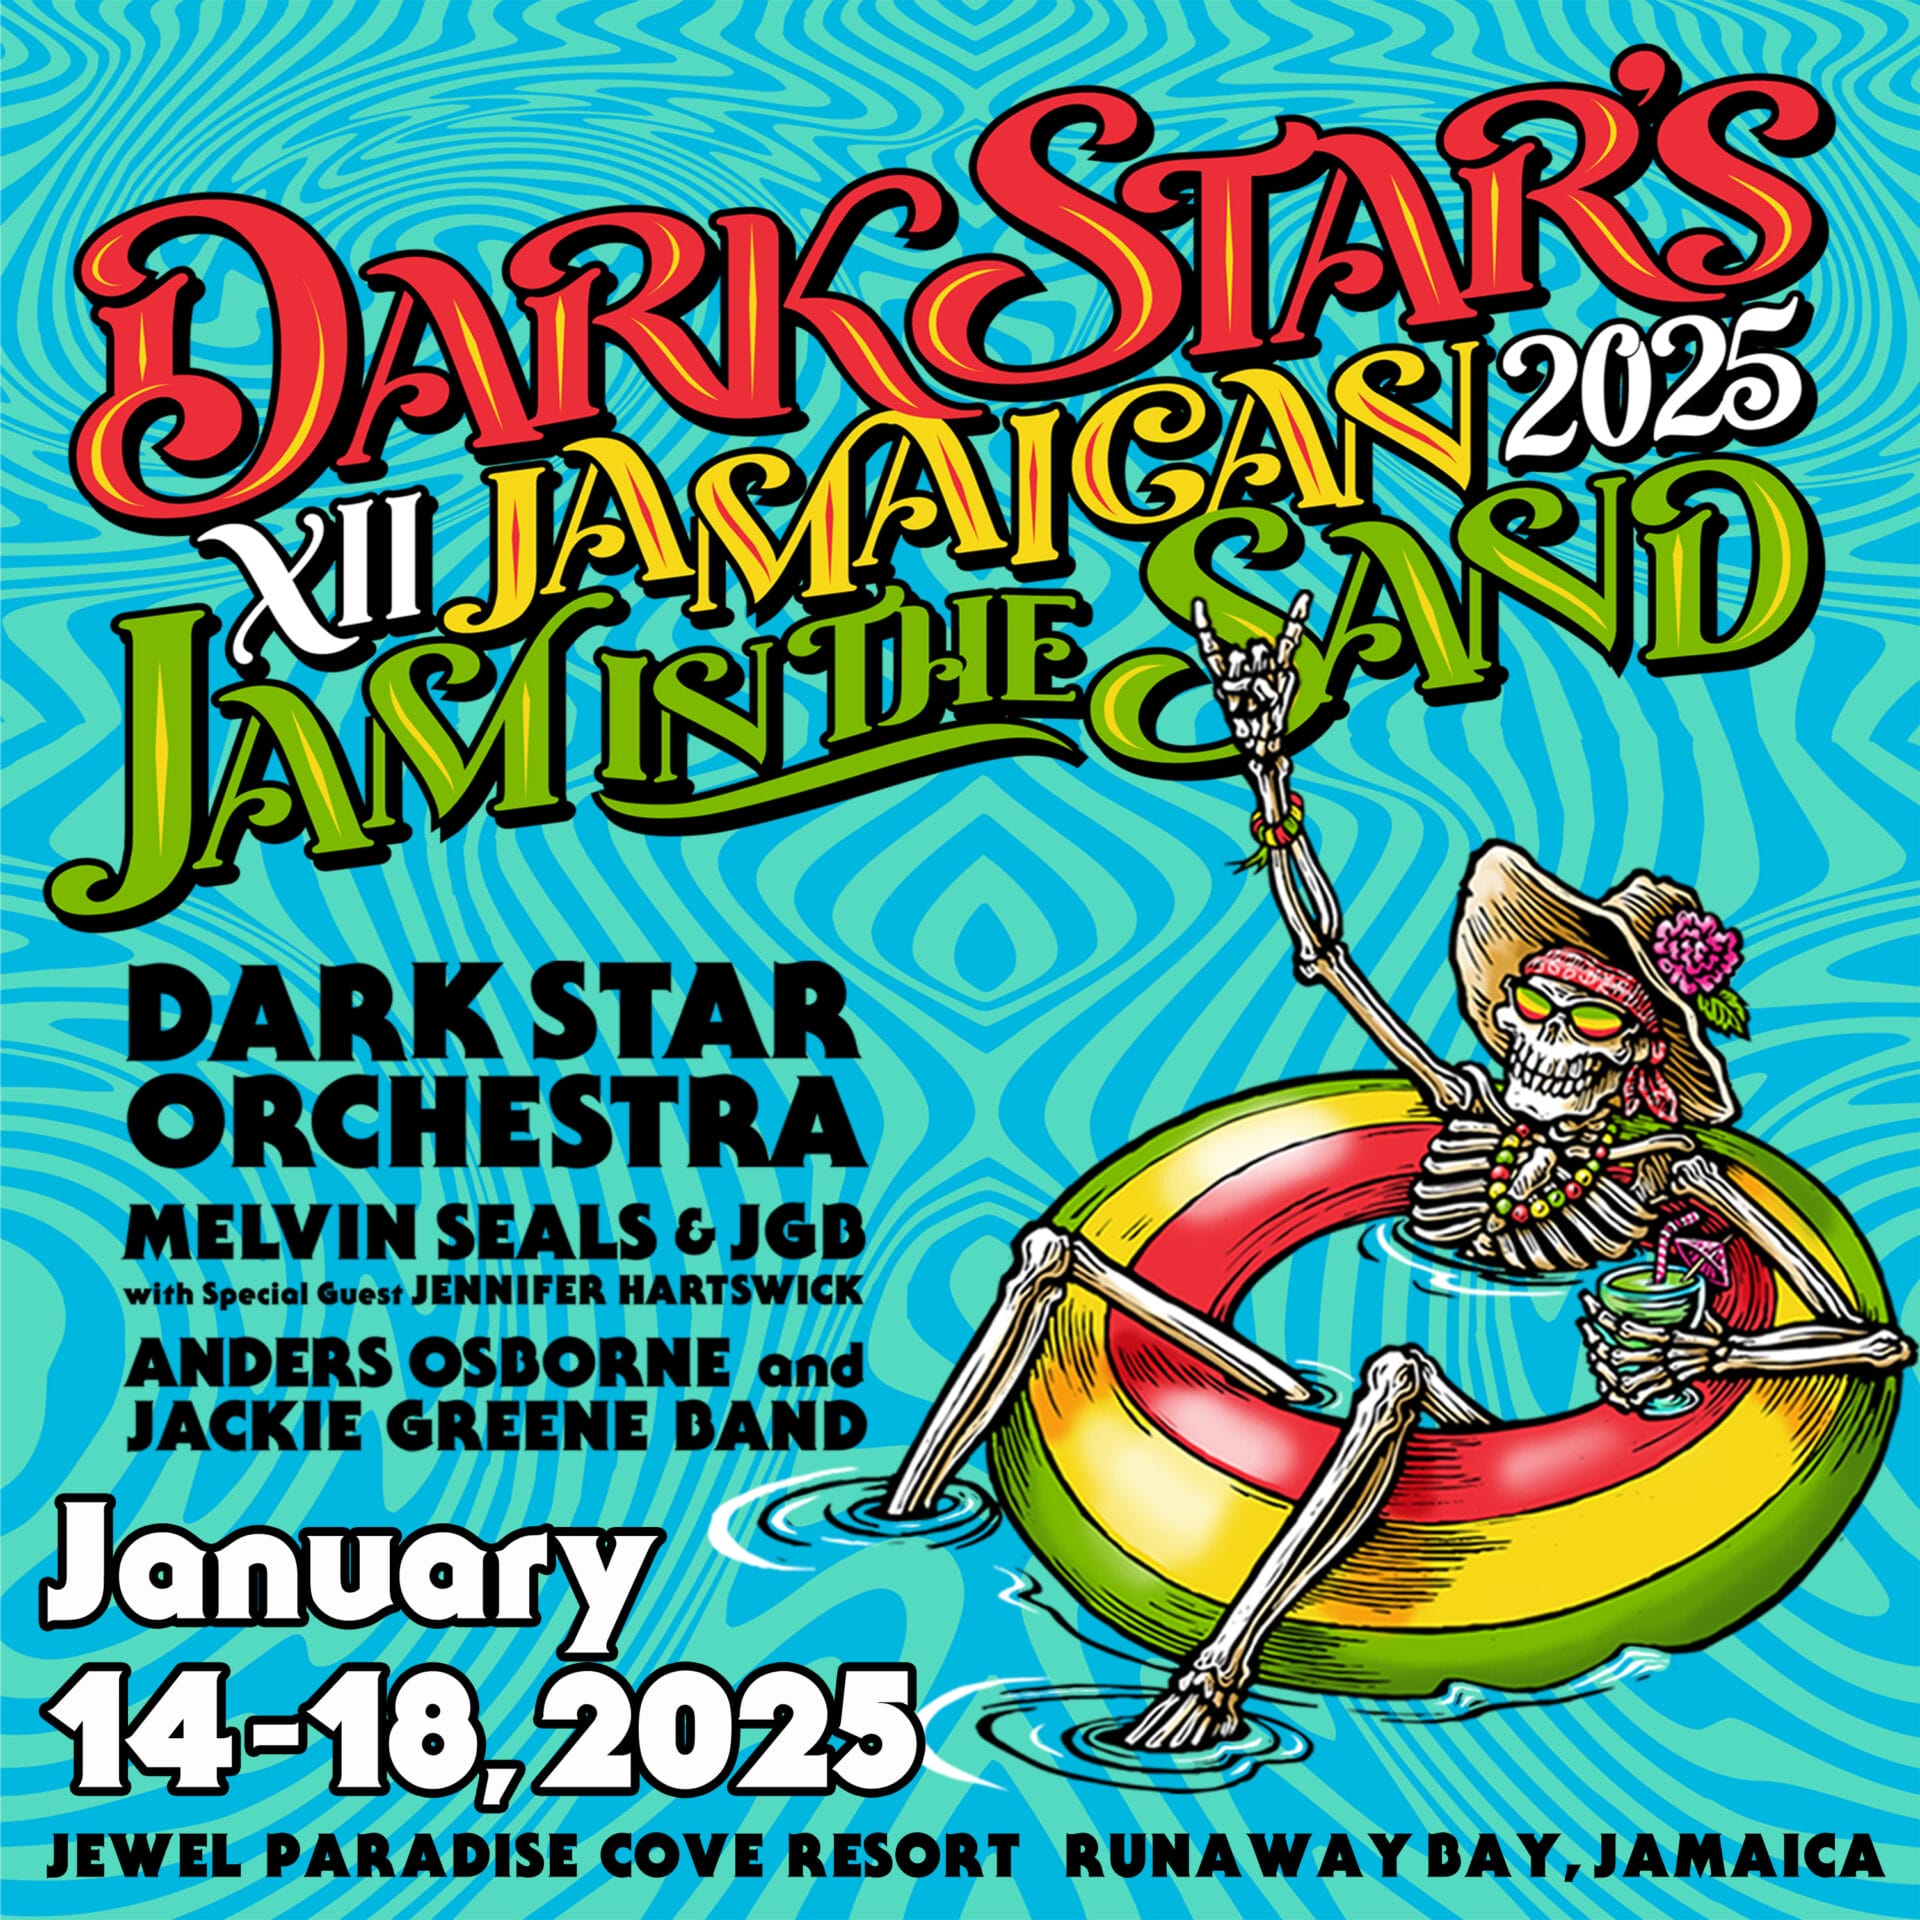 Dark Star Orchestra Detail Jam in the Sand XII, with Melvin Seals and JGB, Anders Osborne and Jackie Greene